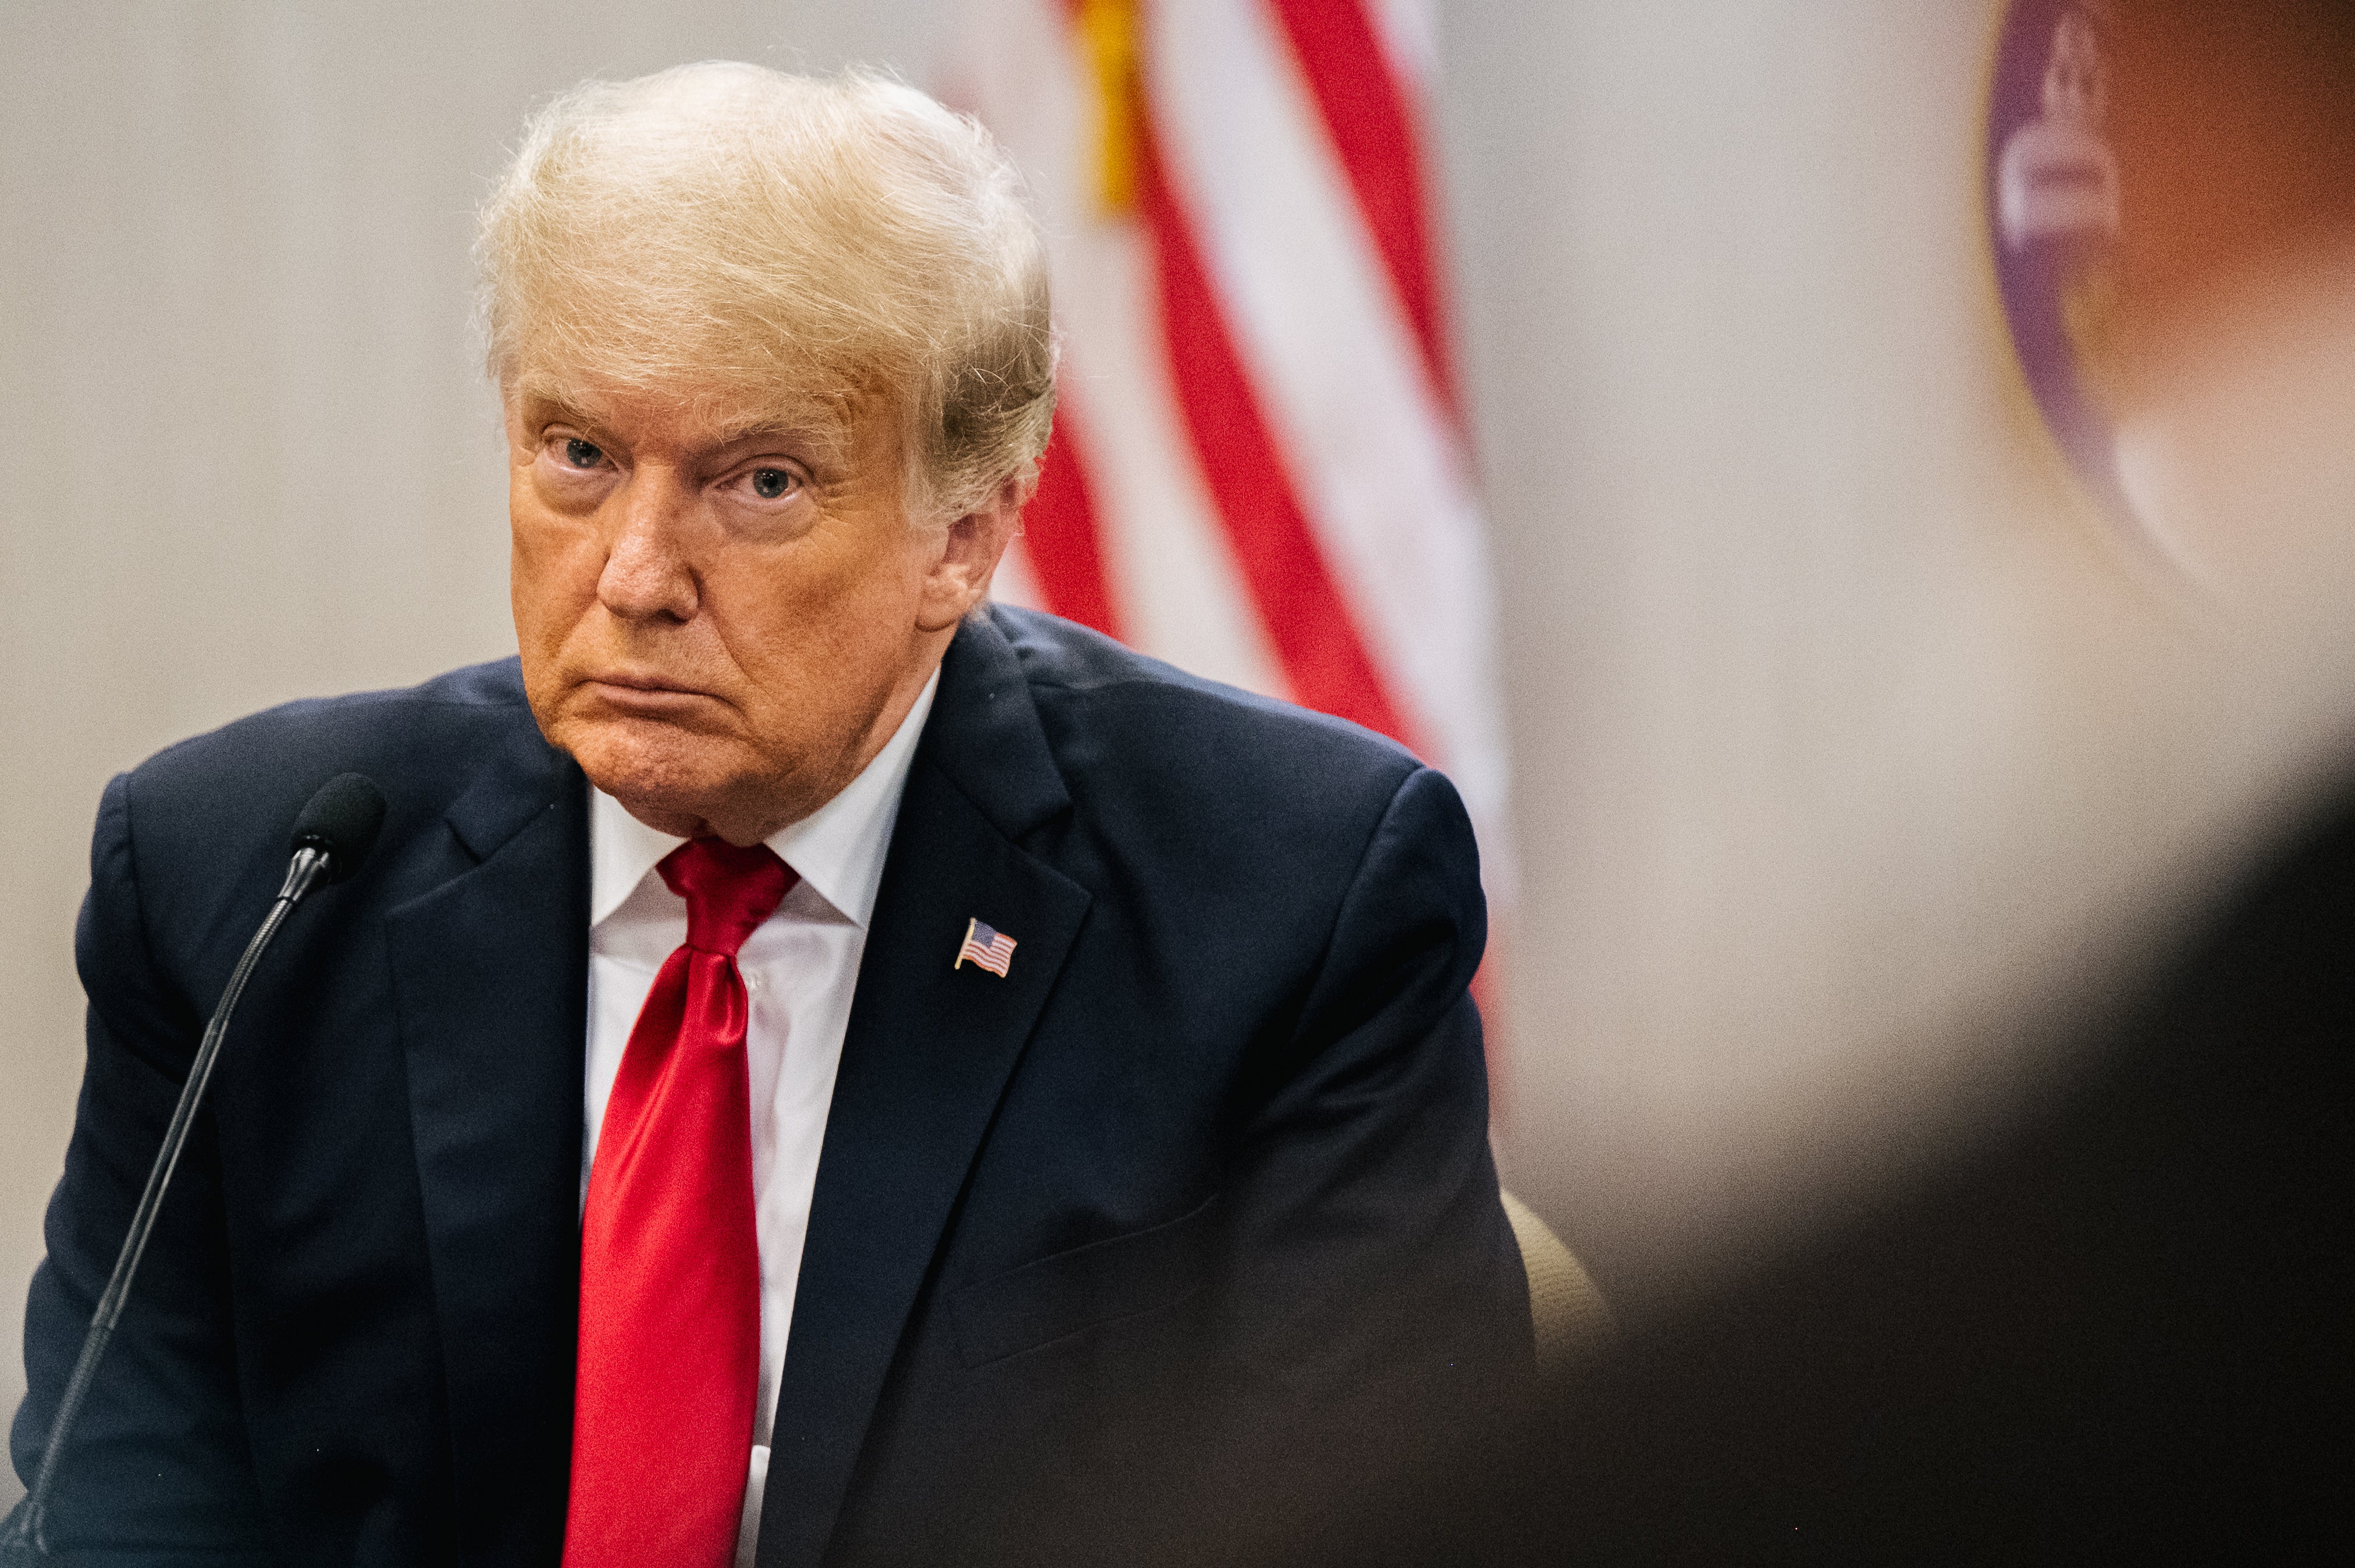 <p>Former President Donald Trump attends a border security briefing to discuss further plans in securing the southern border wall on June 30, 2021 in Weslaco, Texas</p>